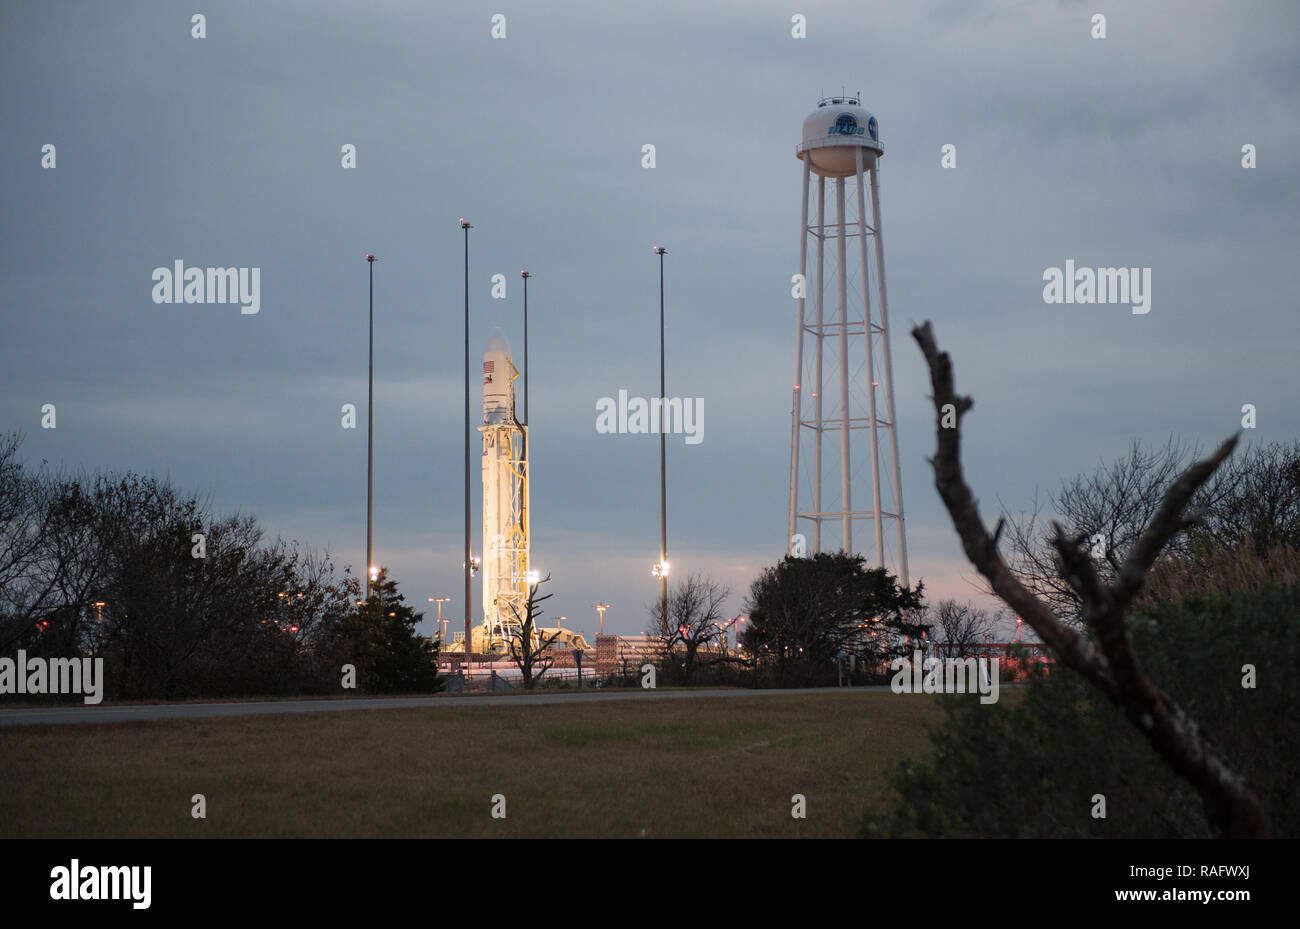 The Northrop Grumman Antares rocket, with Cygnus resupply spacecraft onboard, is prepared for launch on Pad-0A at the NASA Wallops Flight Facility November 14, 2018  in Wallops, Virginia. The commercial cargo resupply mission will carrying 7,400 pounds of supplies and equipment to the International Space Station. Stock Photo